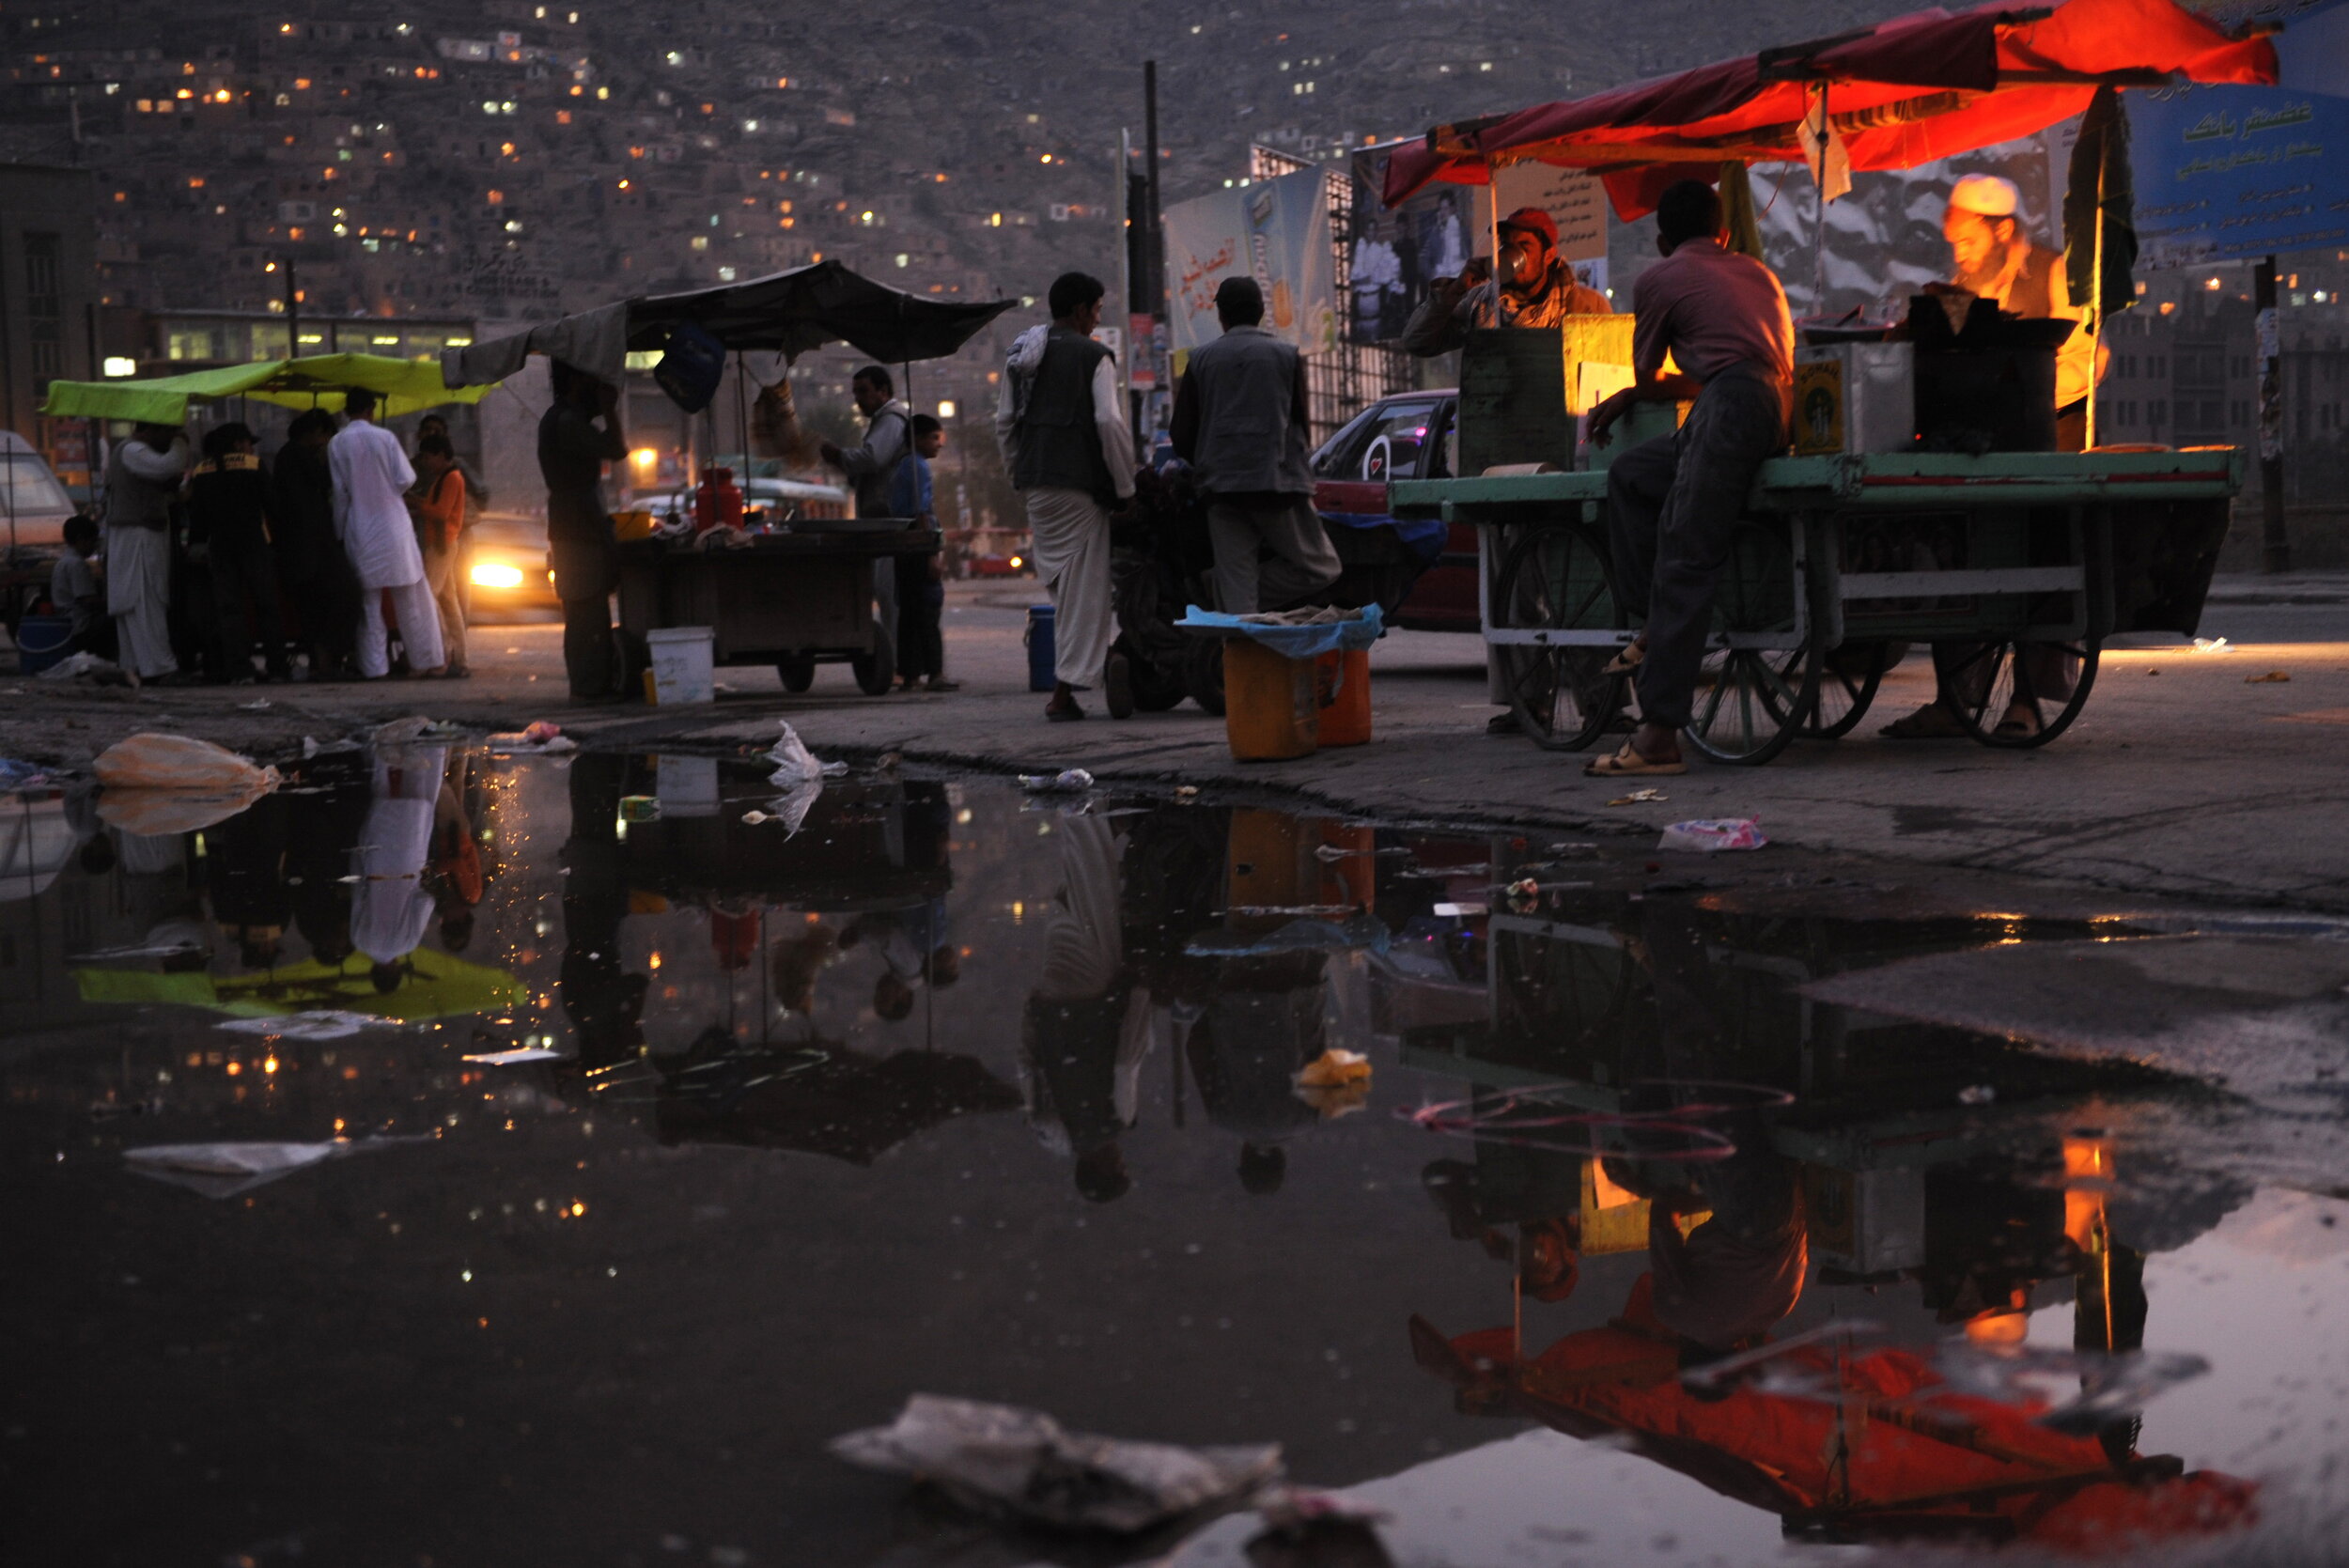  Afghan men break their fast at the time of iftar, during the holy month of Ramadan in Kabul on September 1, 2009. Islam’s holy month of Ramadan is calculated on the sighting of the new moon.  AFP PHOTO/MASSOUD Hossaini   